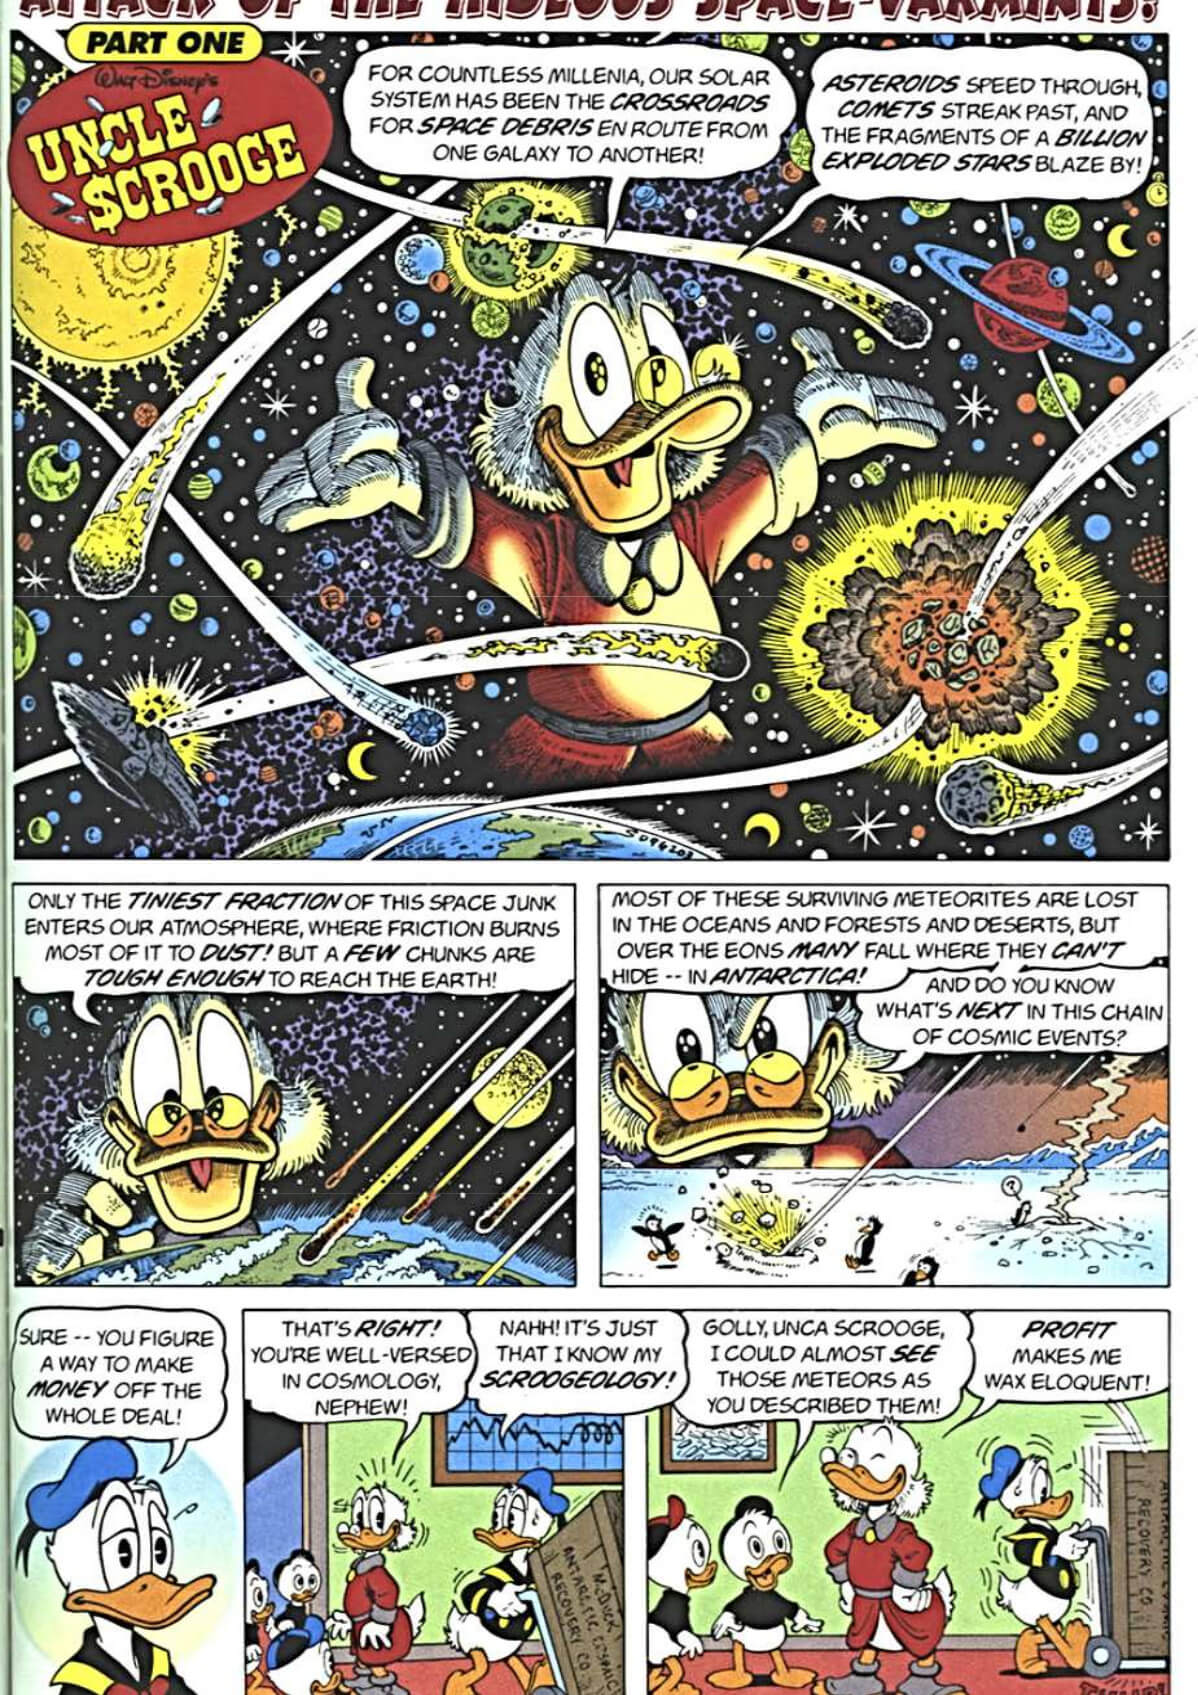 Attack Of The Hideous Space-Varmints! first page